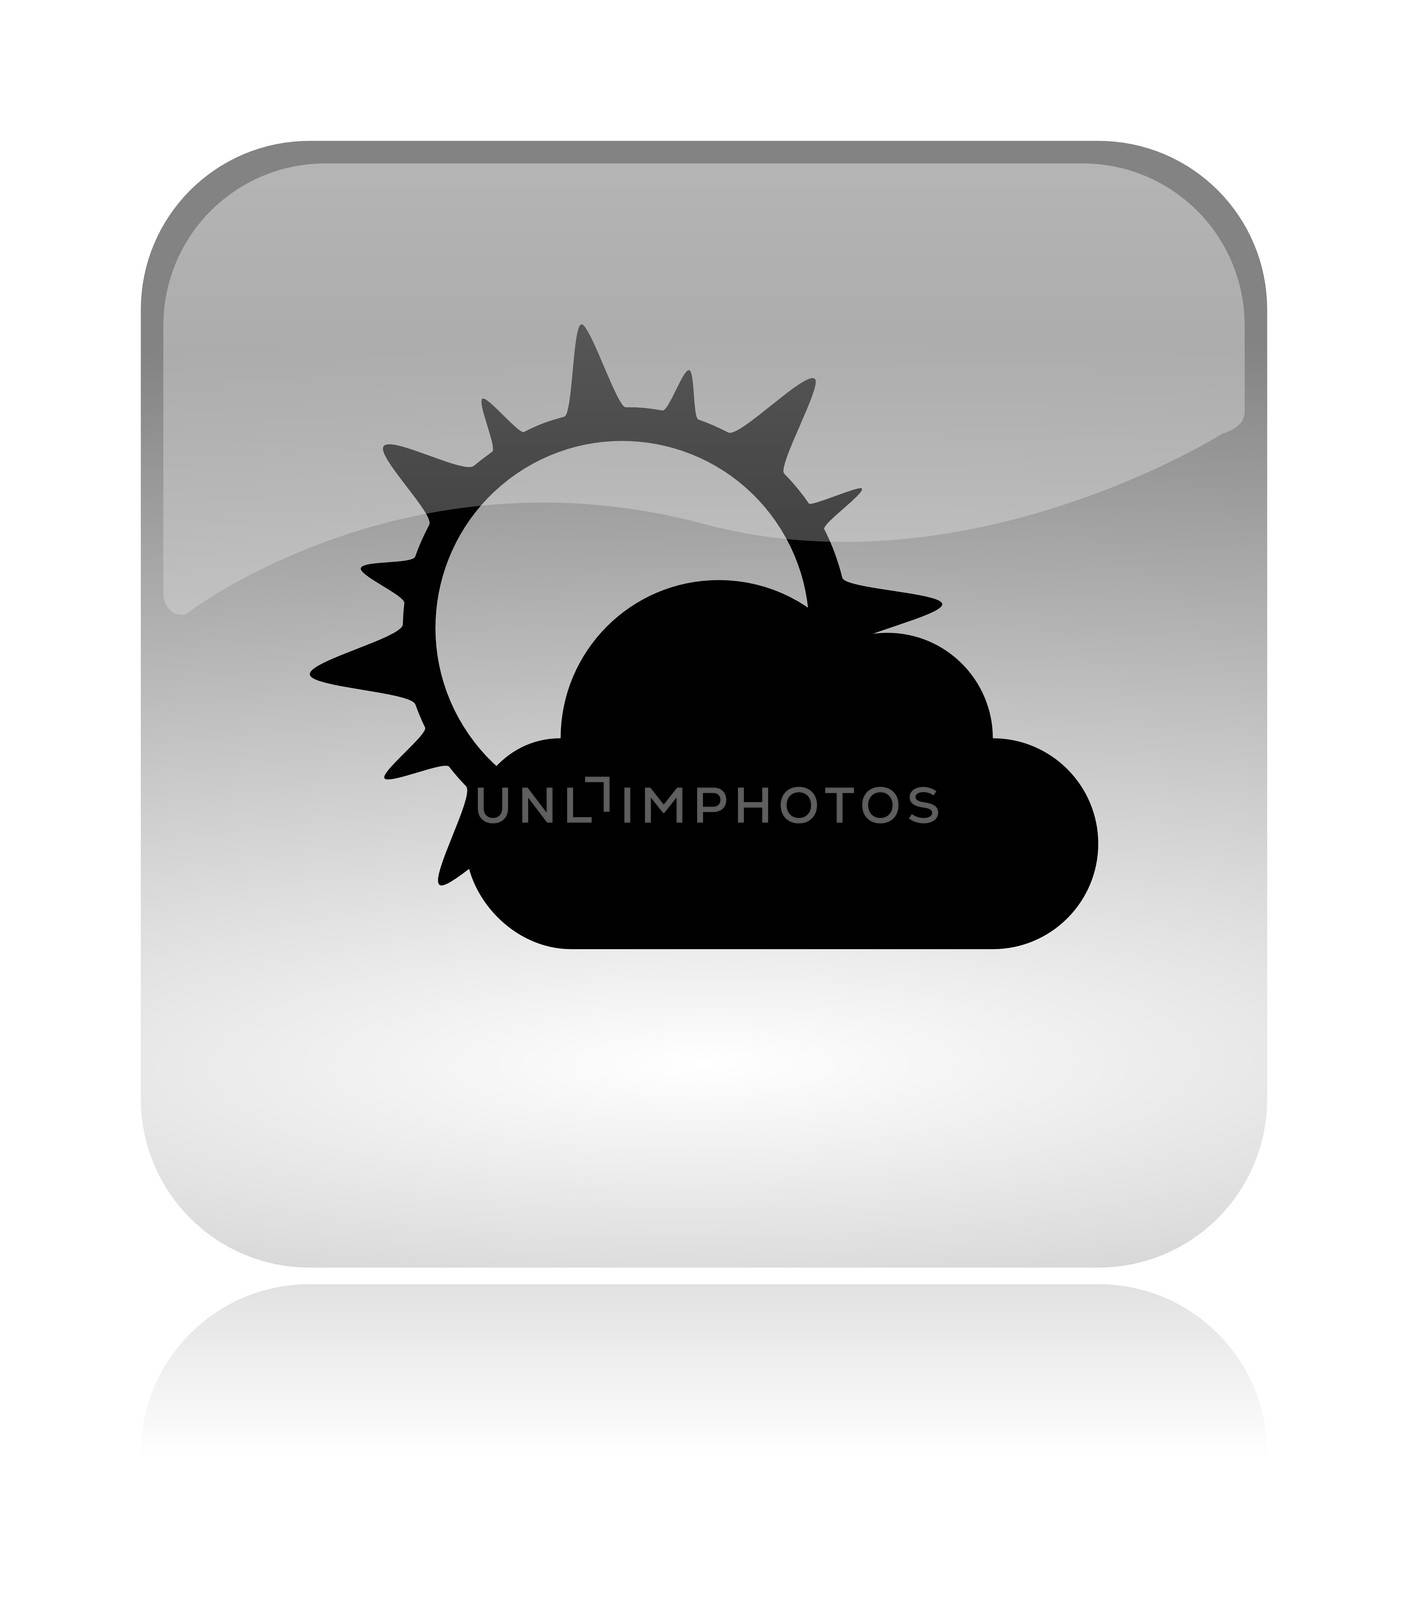 Weather App Rounded Square Icon with Reflection Illustration Isolated on White Background